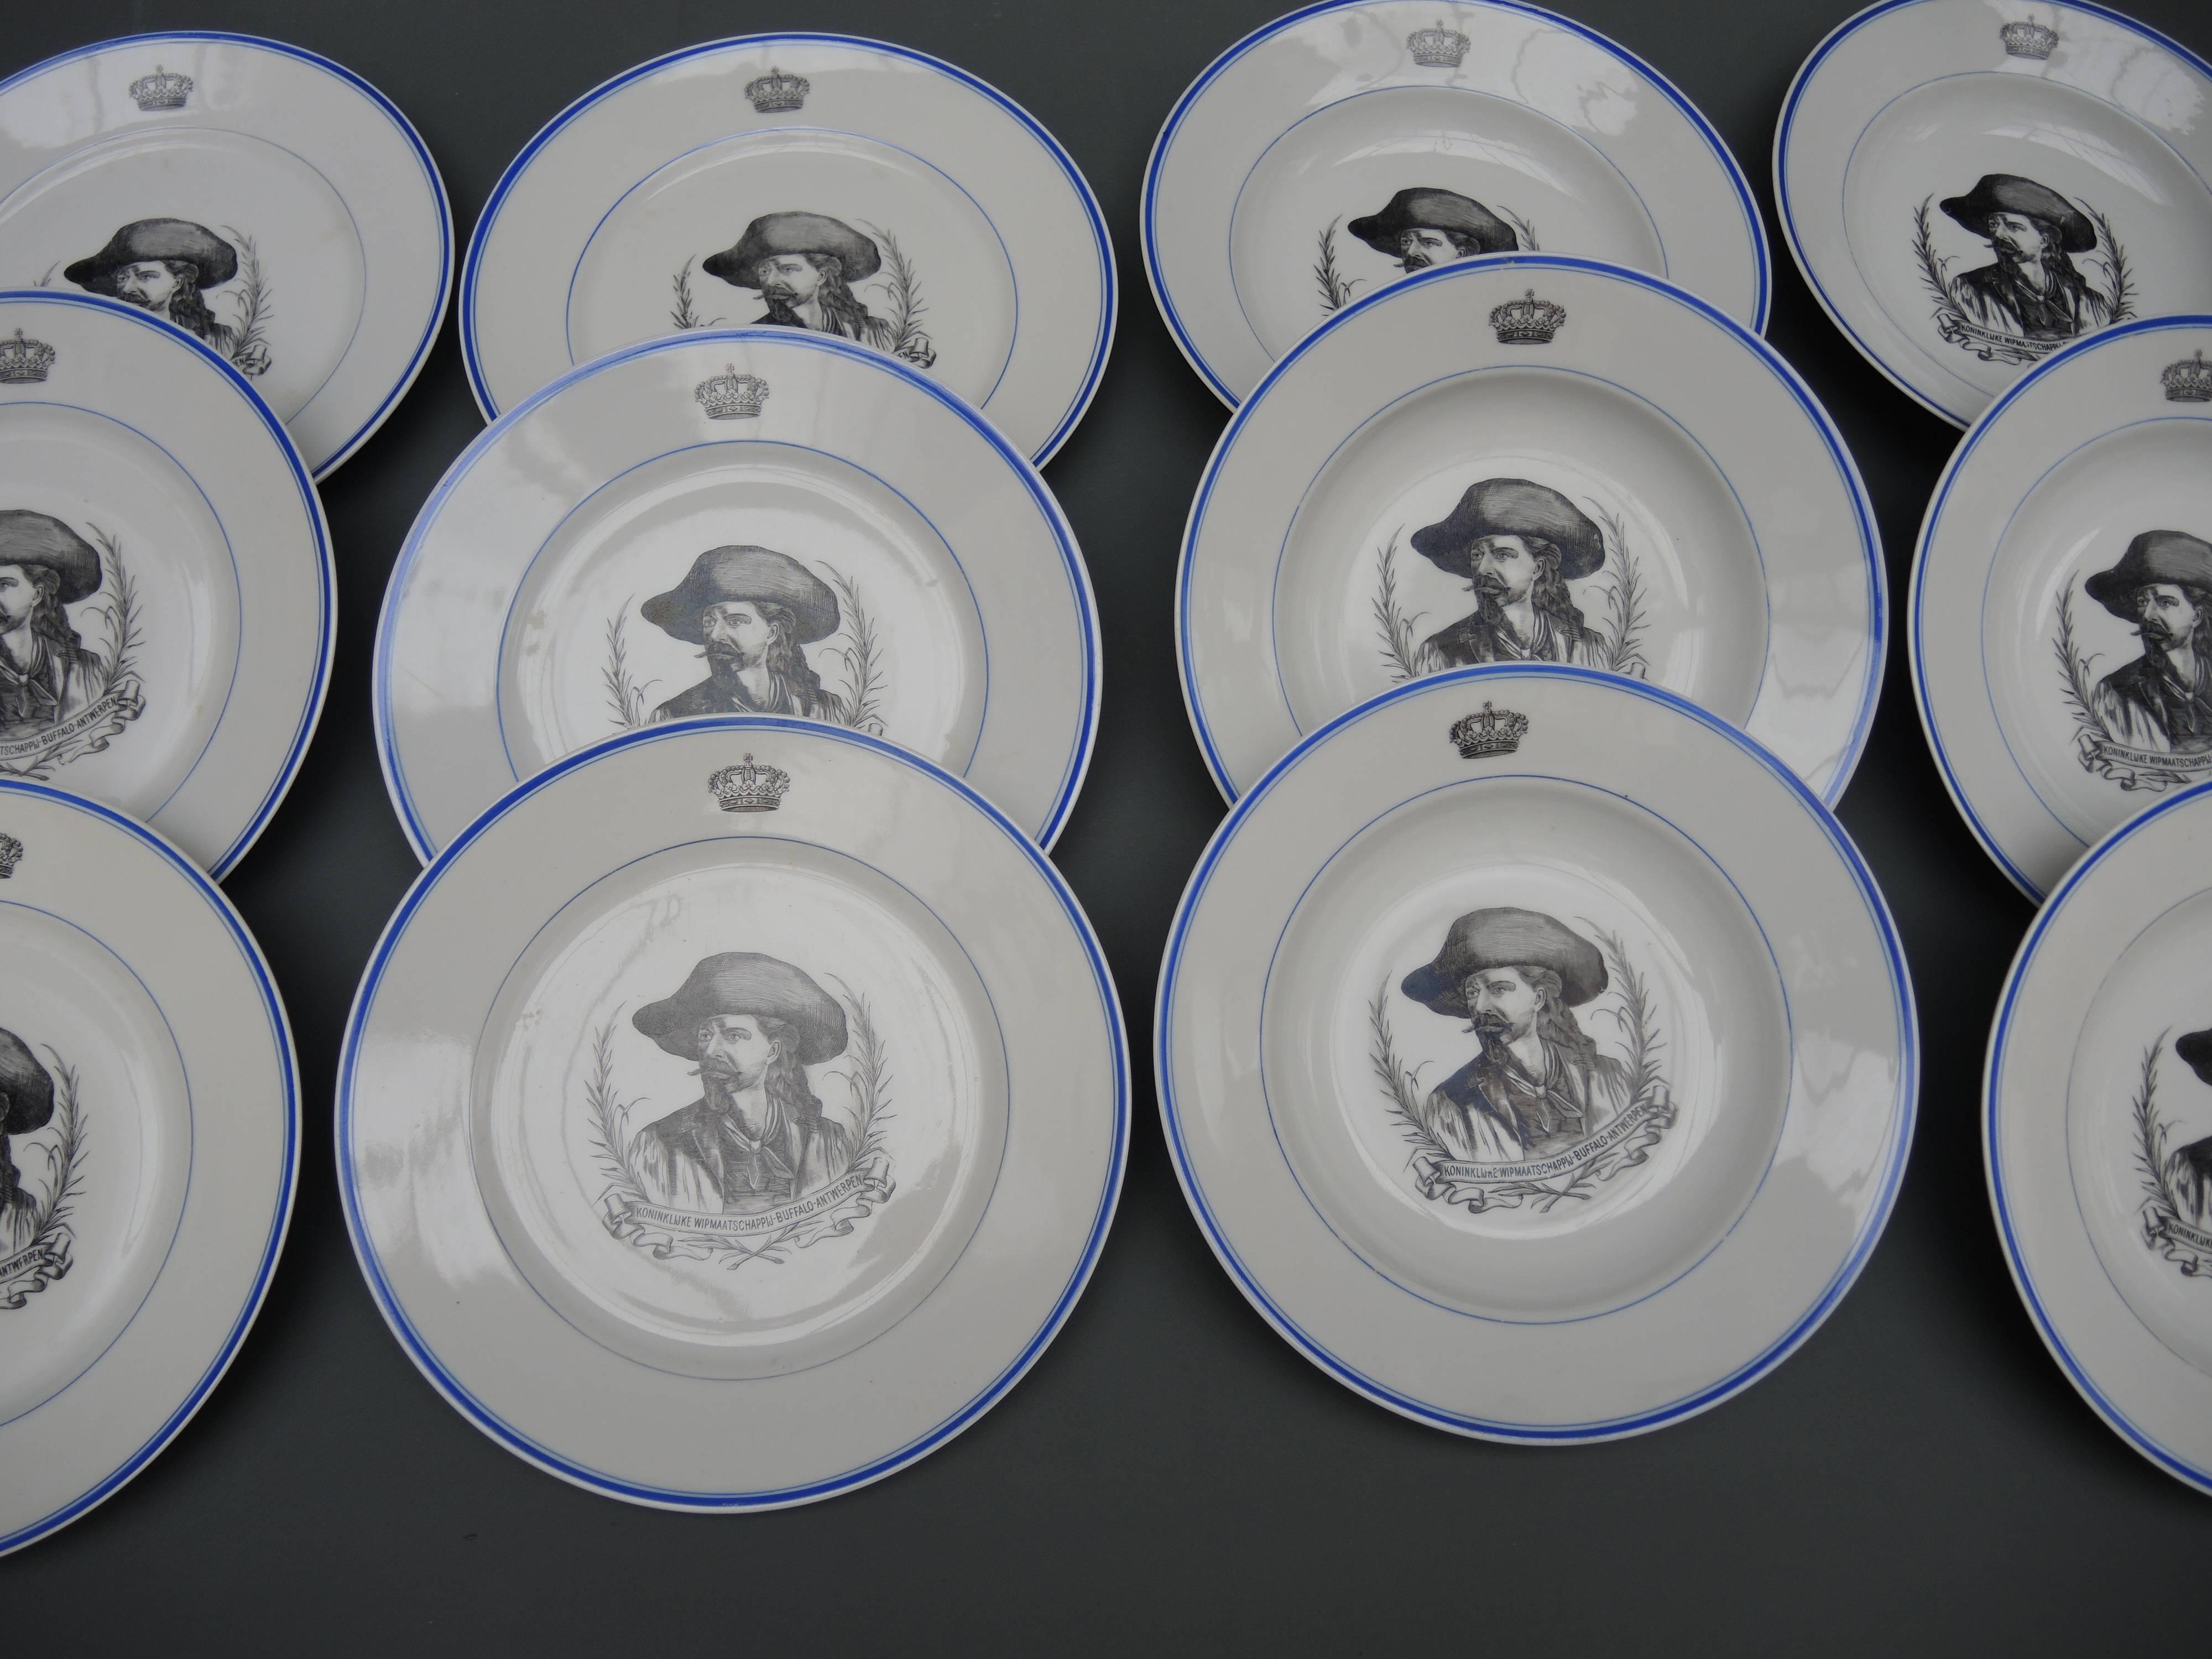 A set of six plates and six soup bowls from the Royal Archery Club "Buffalo" Antwerp, Belgium. The club was named after Buffalo Bill and used his image as part of their logo.
In September 1906 Buffalo Bill brought his "Wild West